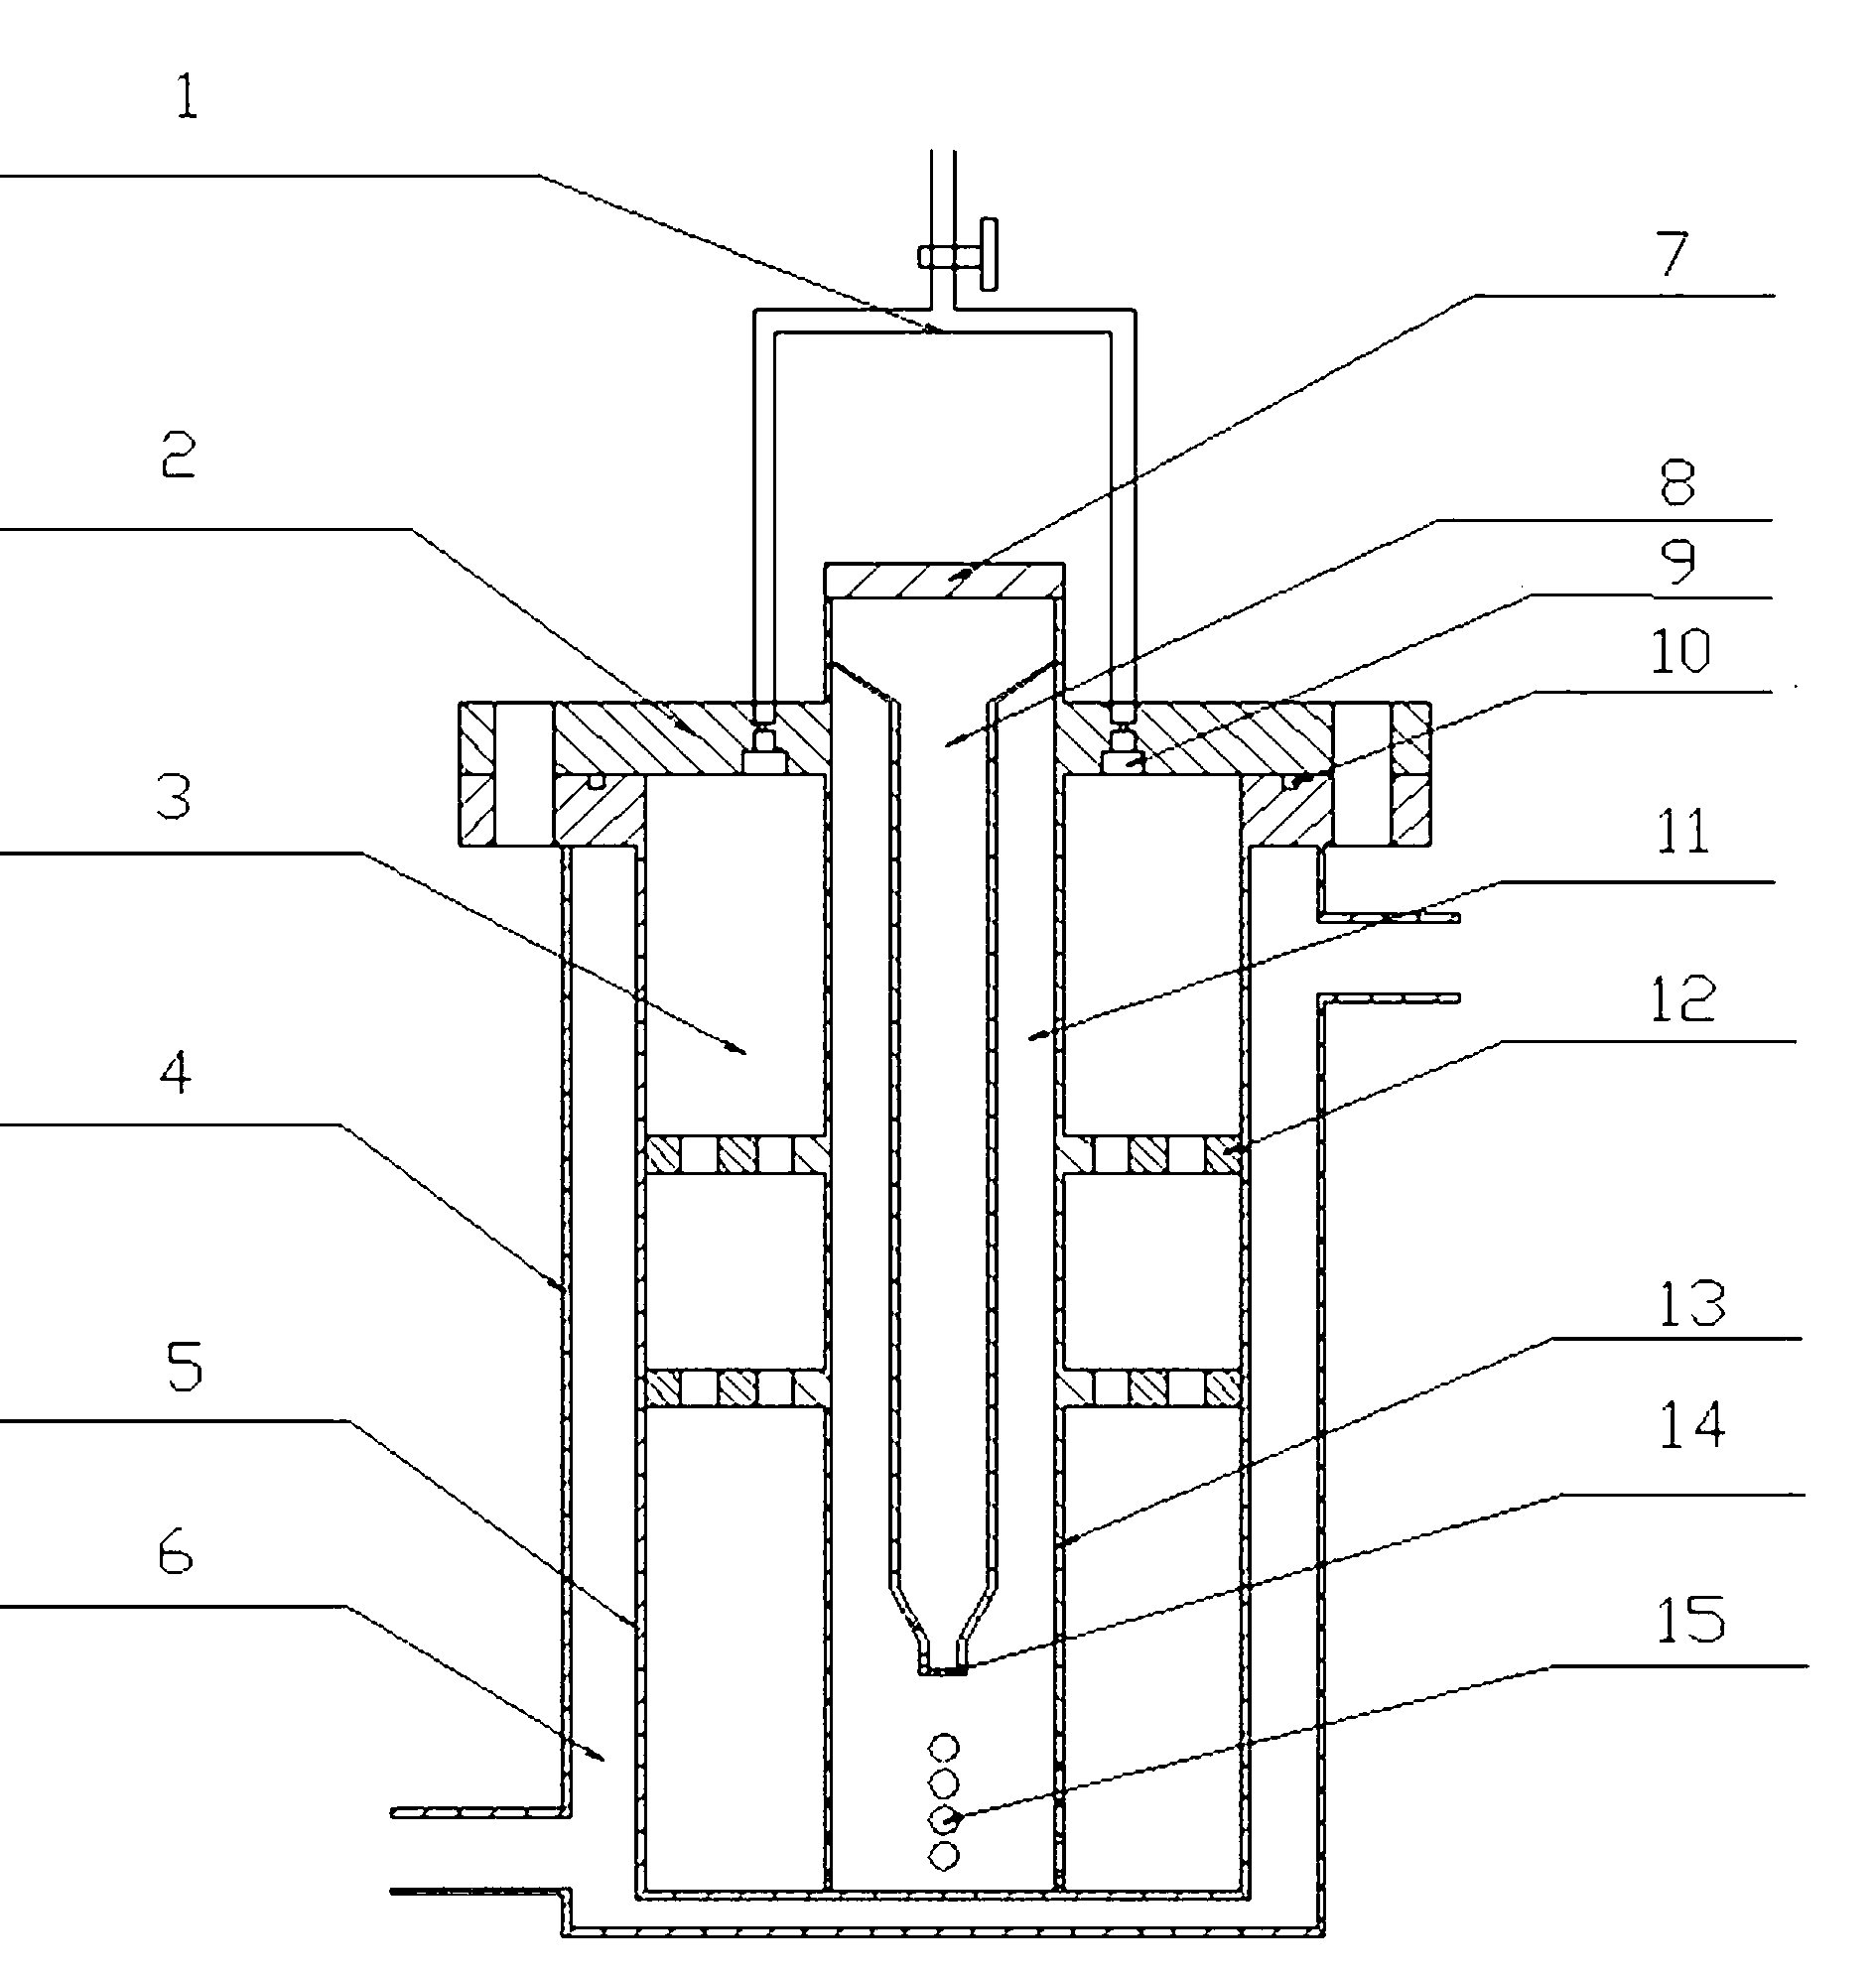 Hydrolysis hydrogen production device with internal integrated feeding tank and layered heat conduction and drying architecture